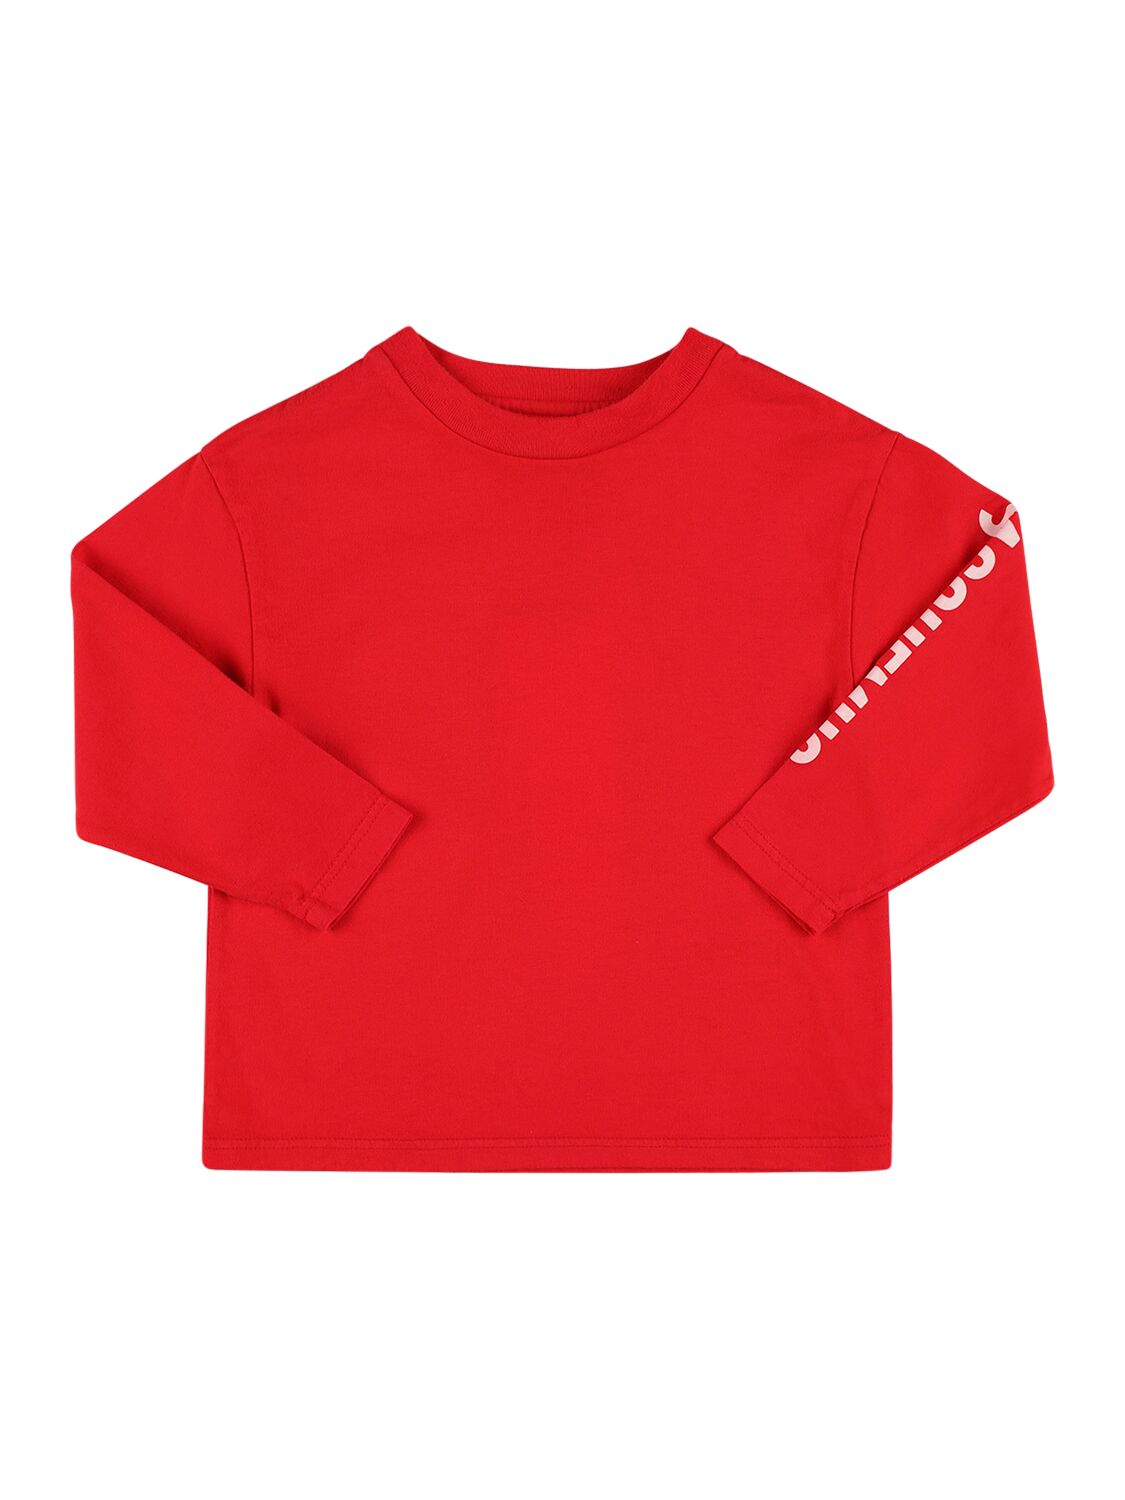 Jacquemus Kids' Printed Cotton Jersey T-shirt In Red